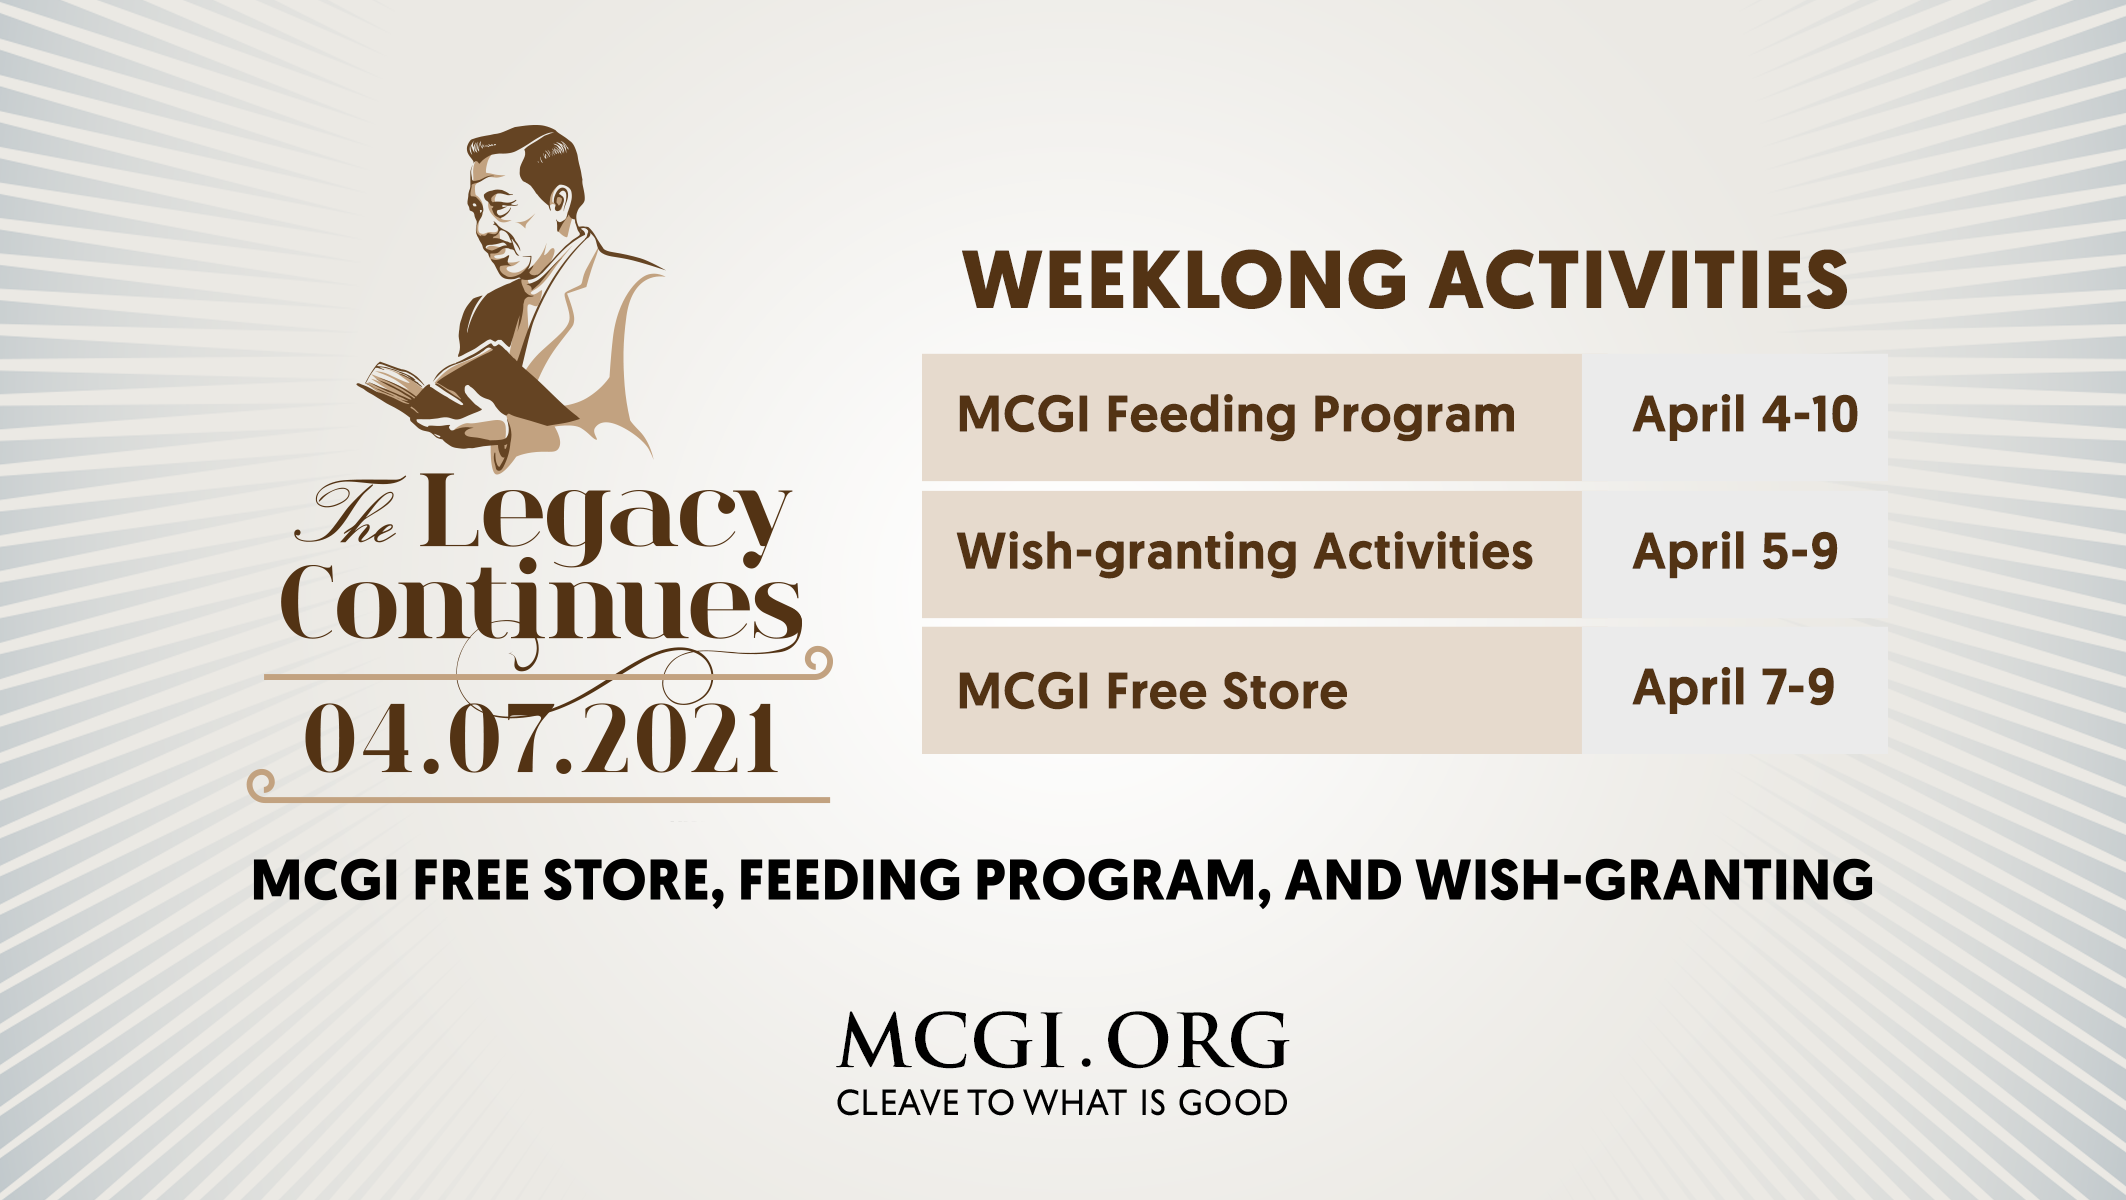 the-legacy-continues-week-long-activities-mcgi-brother-eli